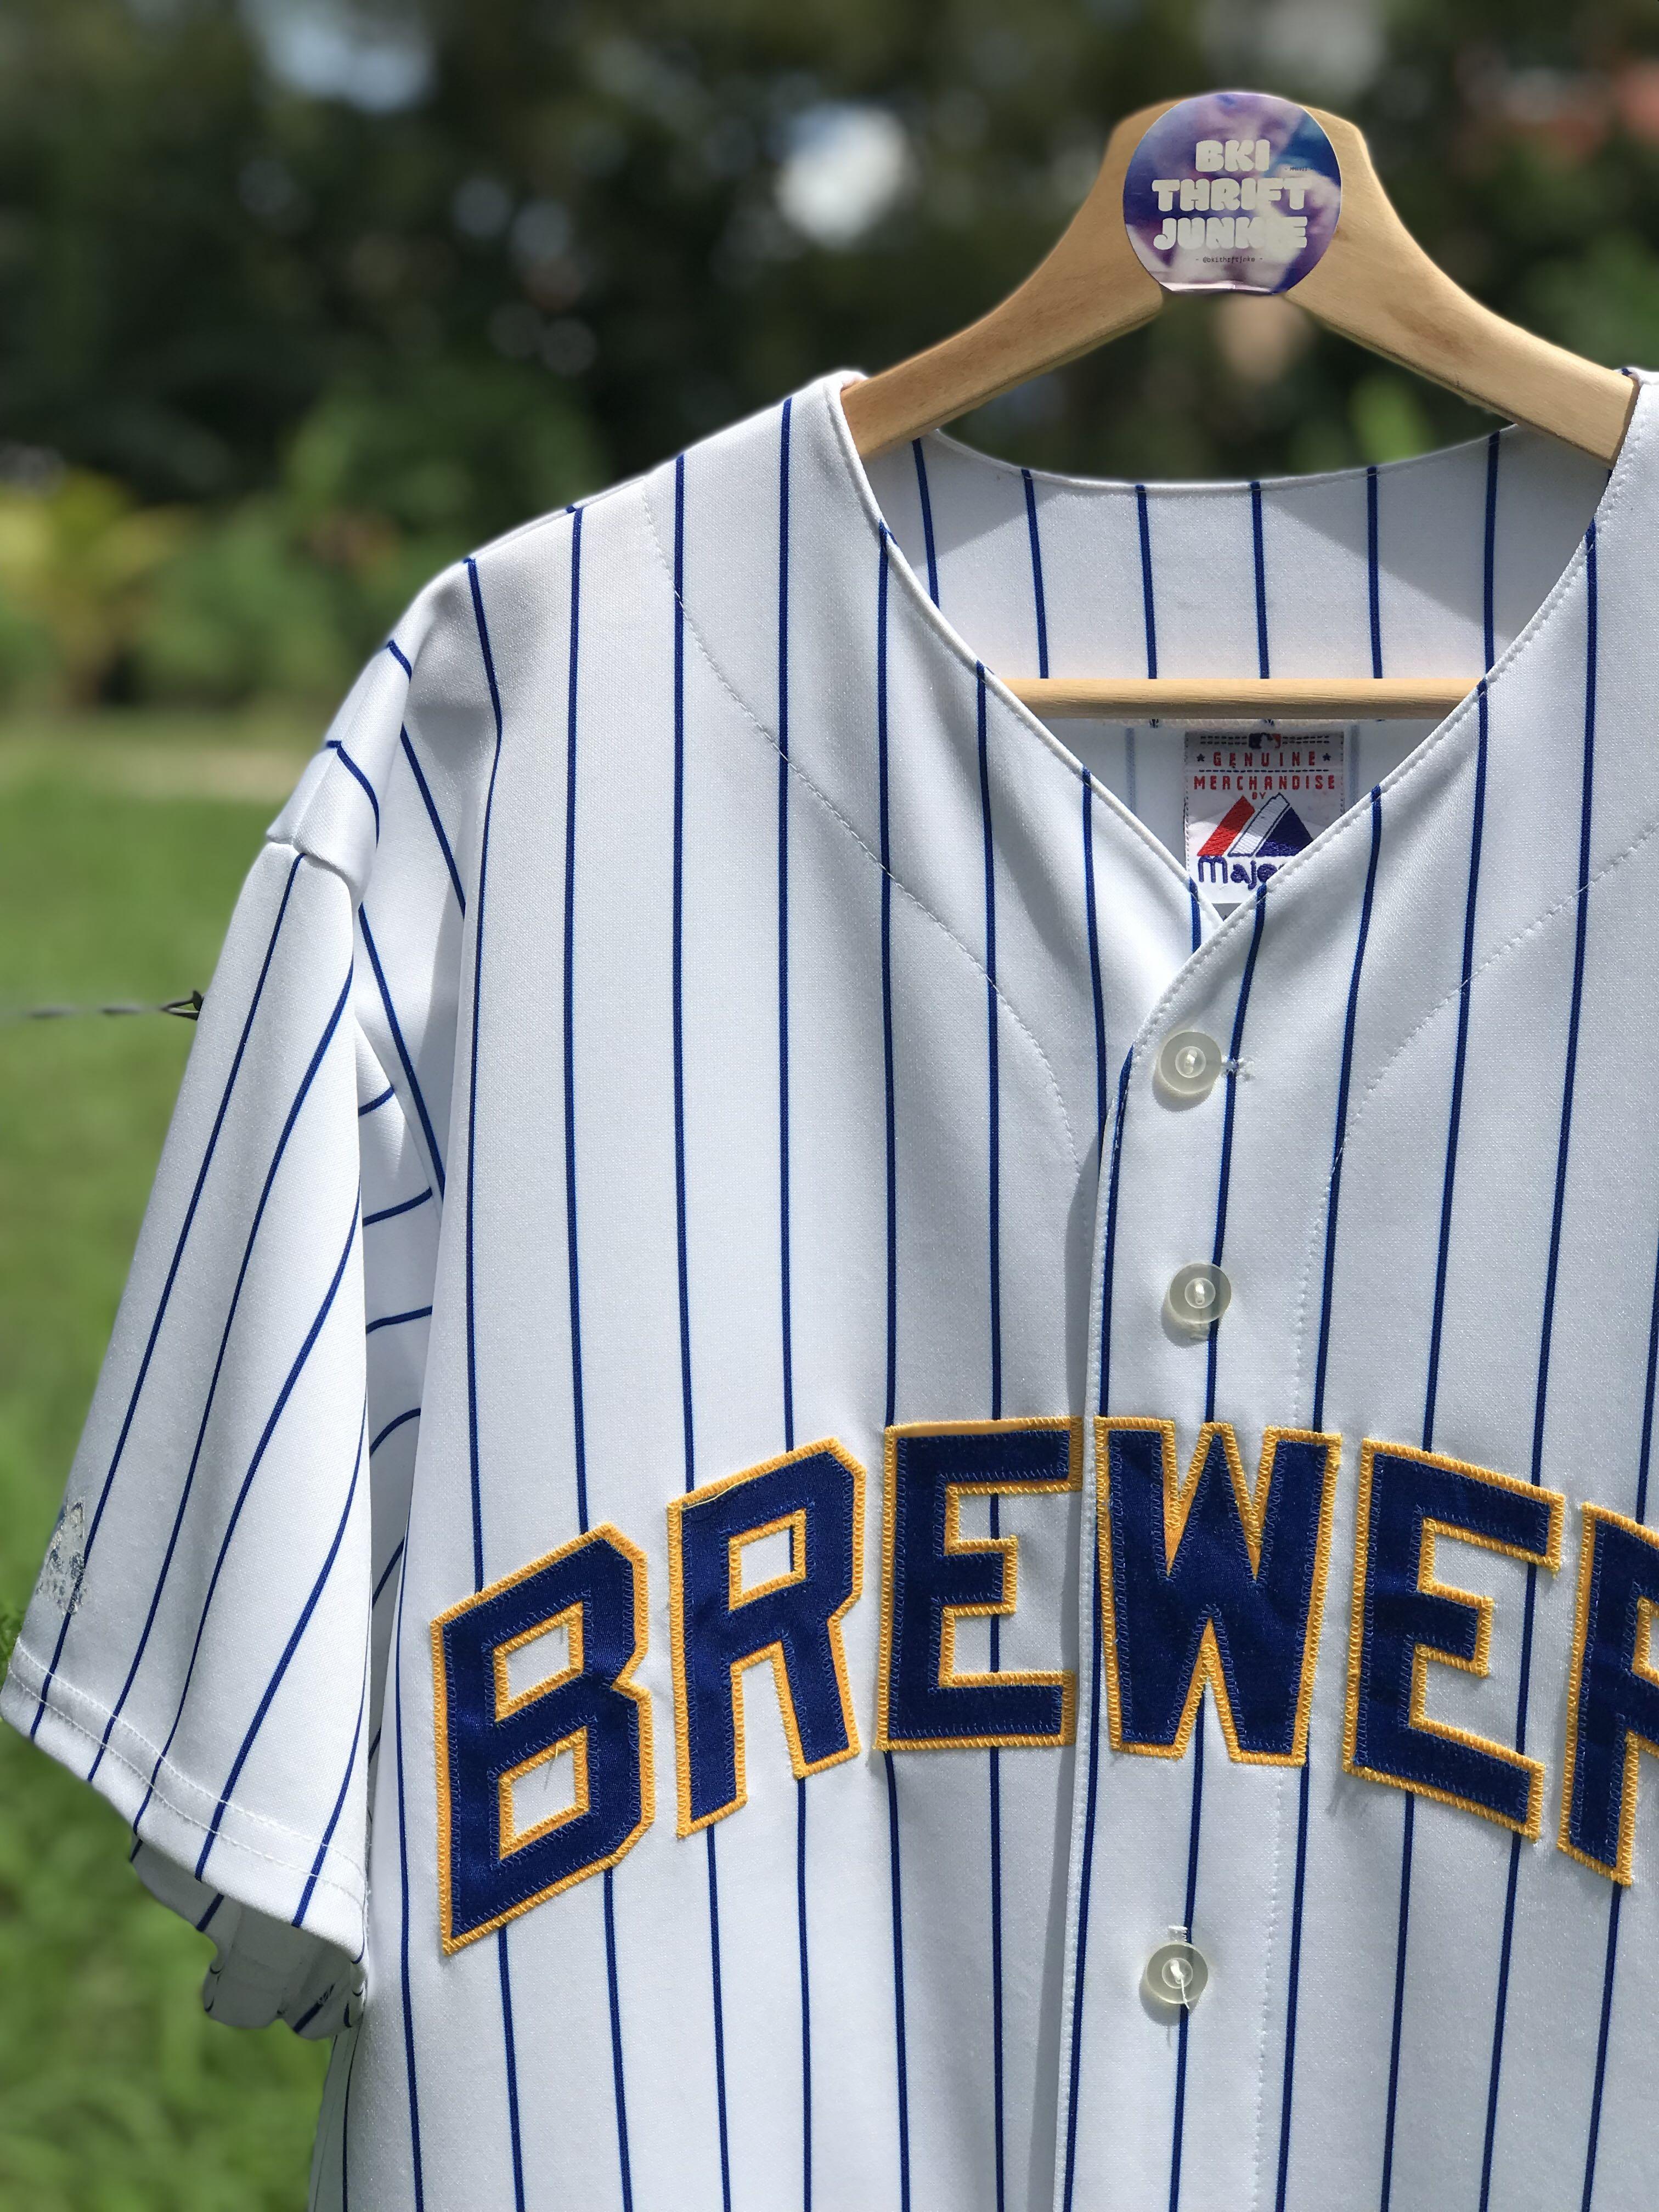 90s brewers jersey